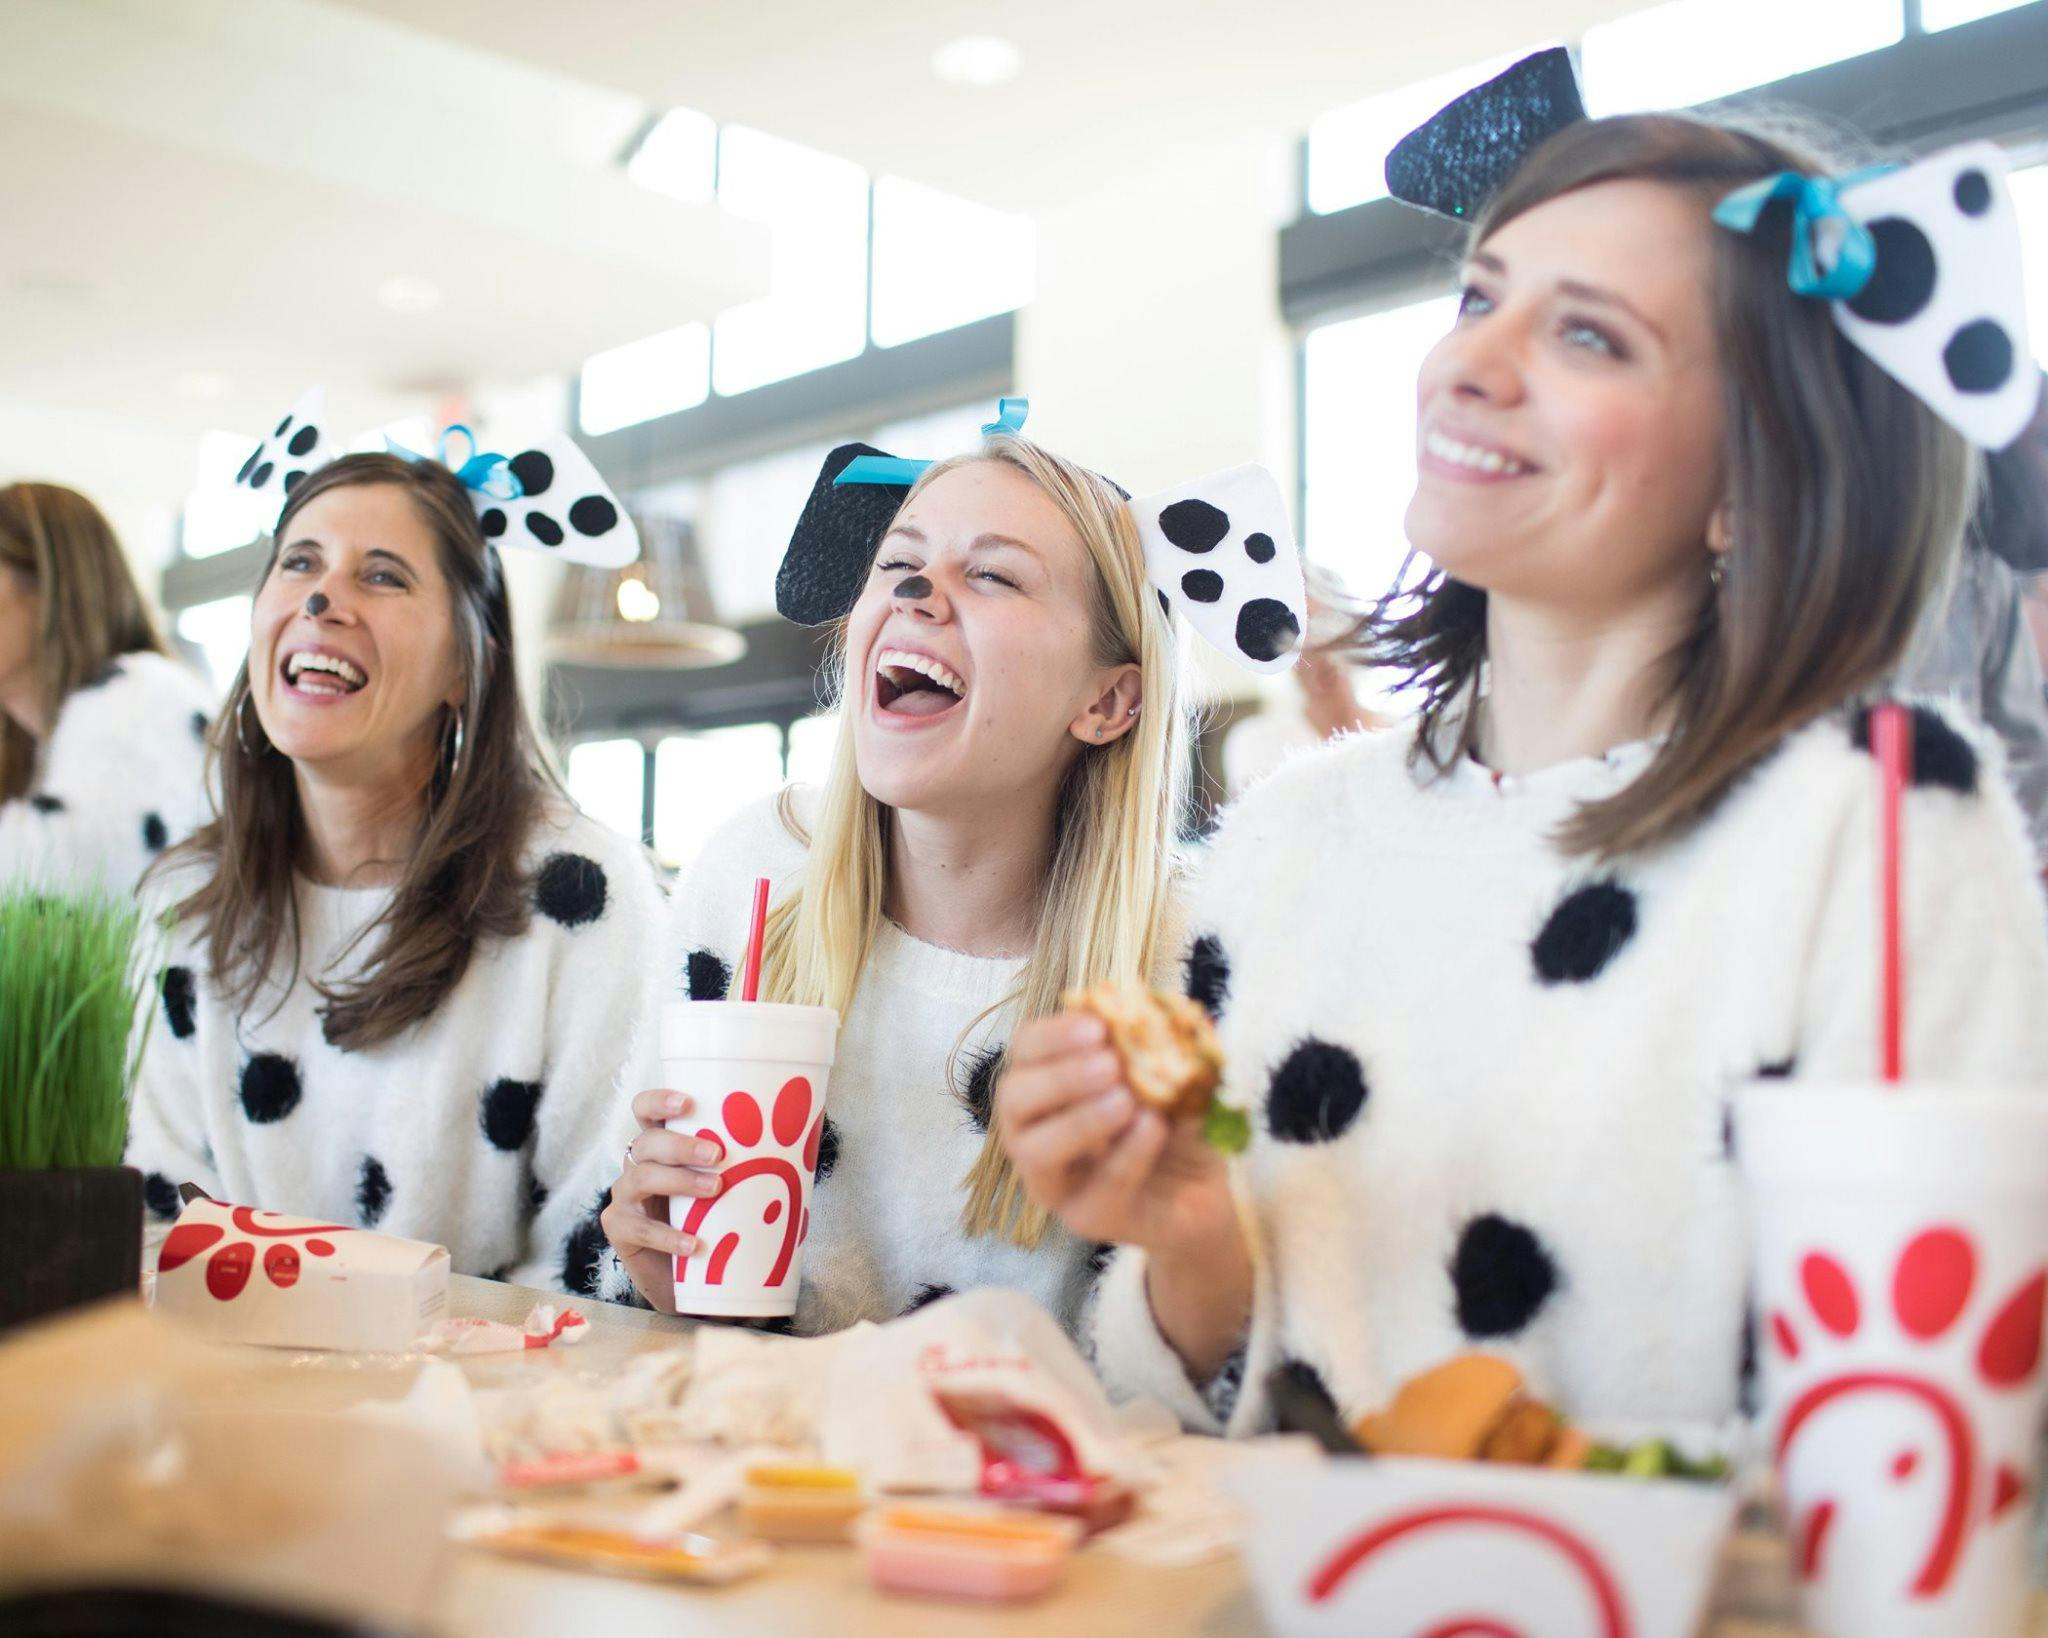 Three women eating chick-fil-a dressed like cows